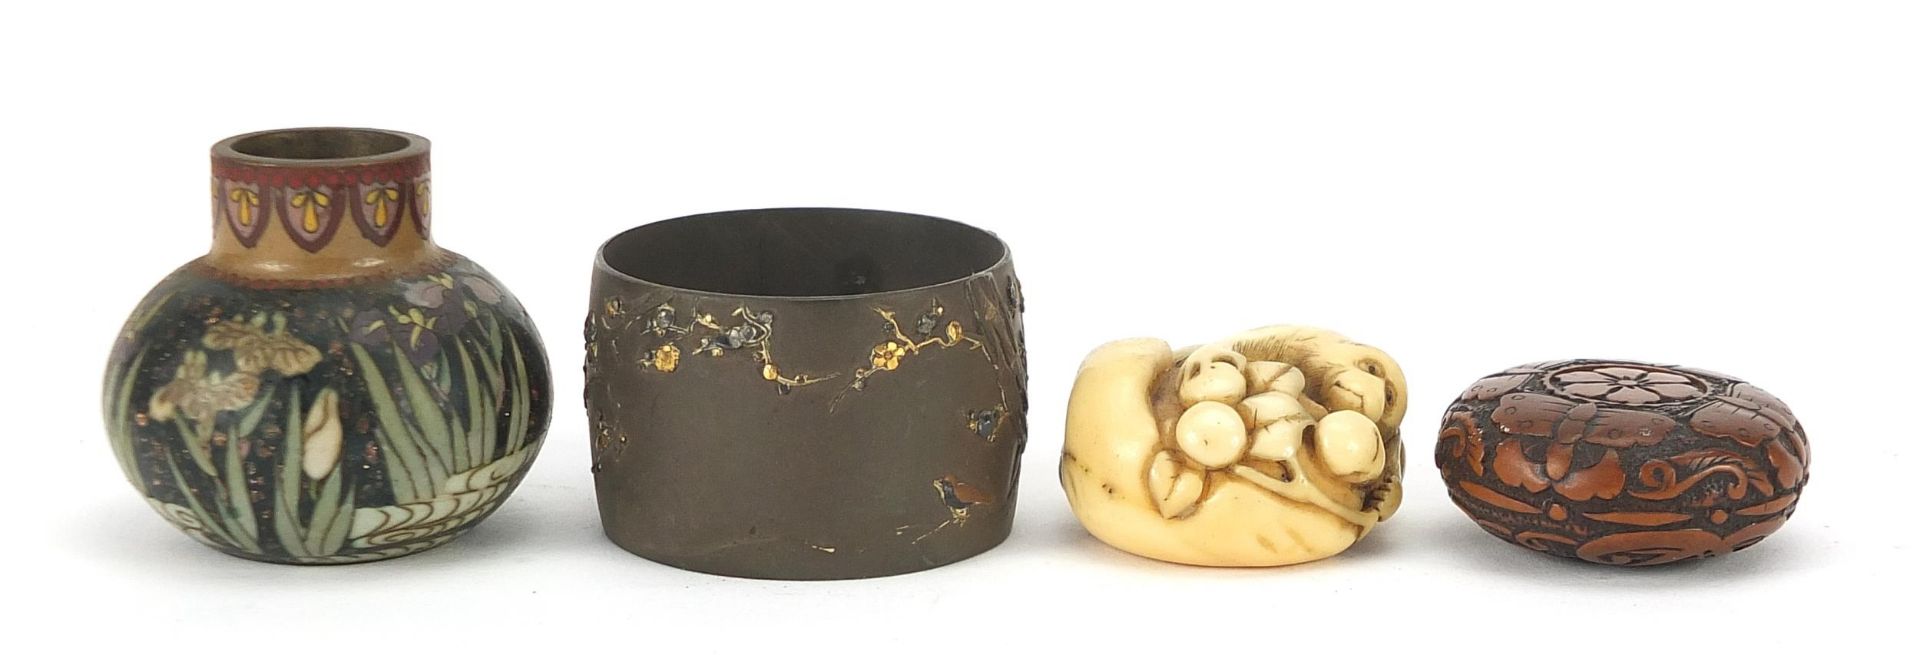 Japanese objects including an ivory toggle, mixed metal napkin ring and cloisonne vase, the - Image 4 of 6